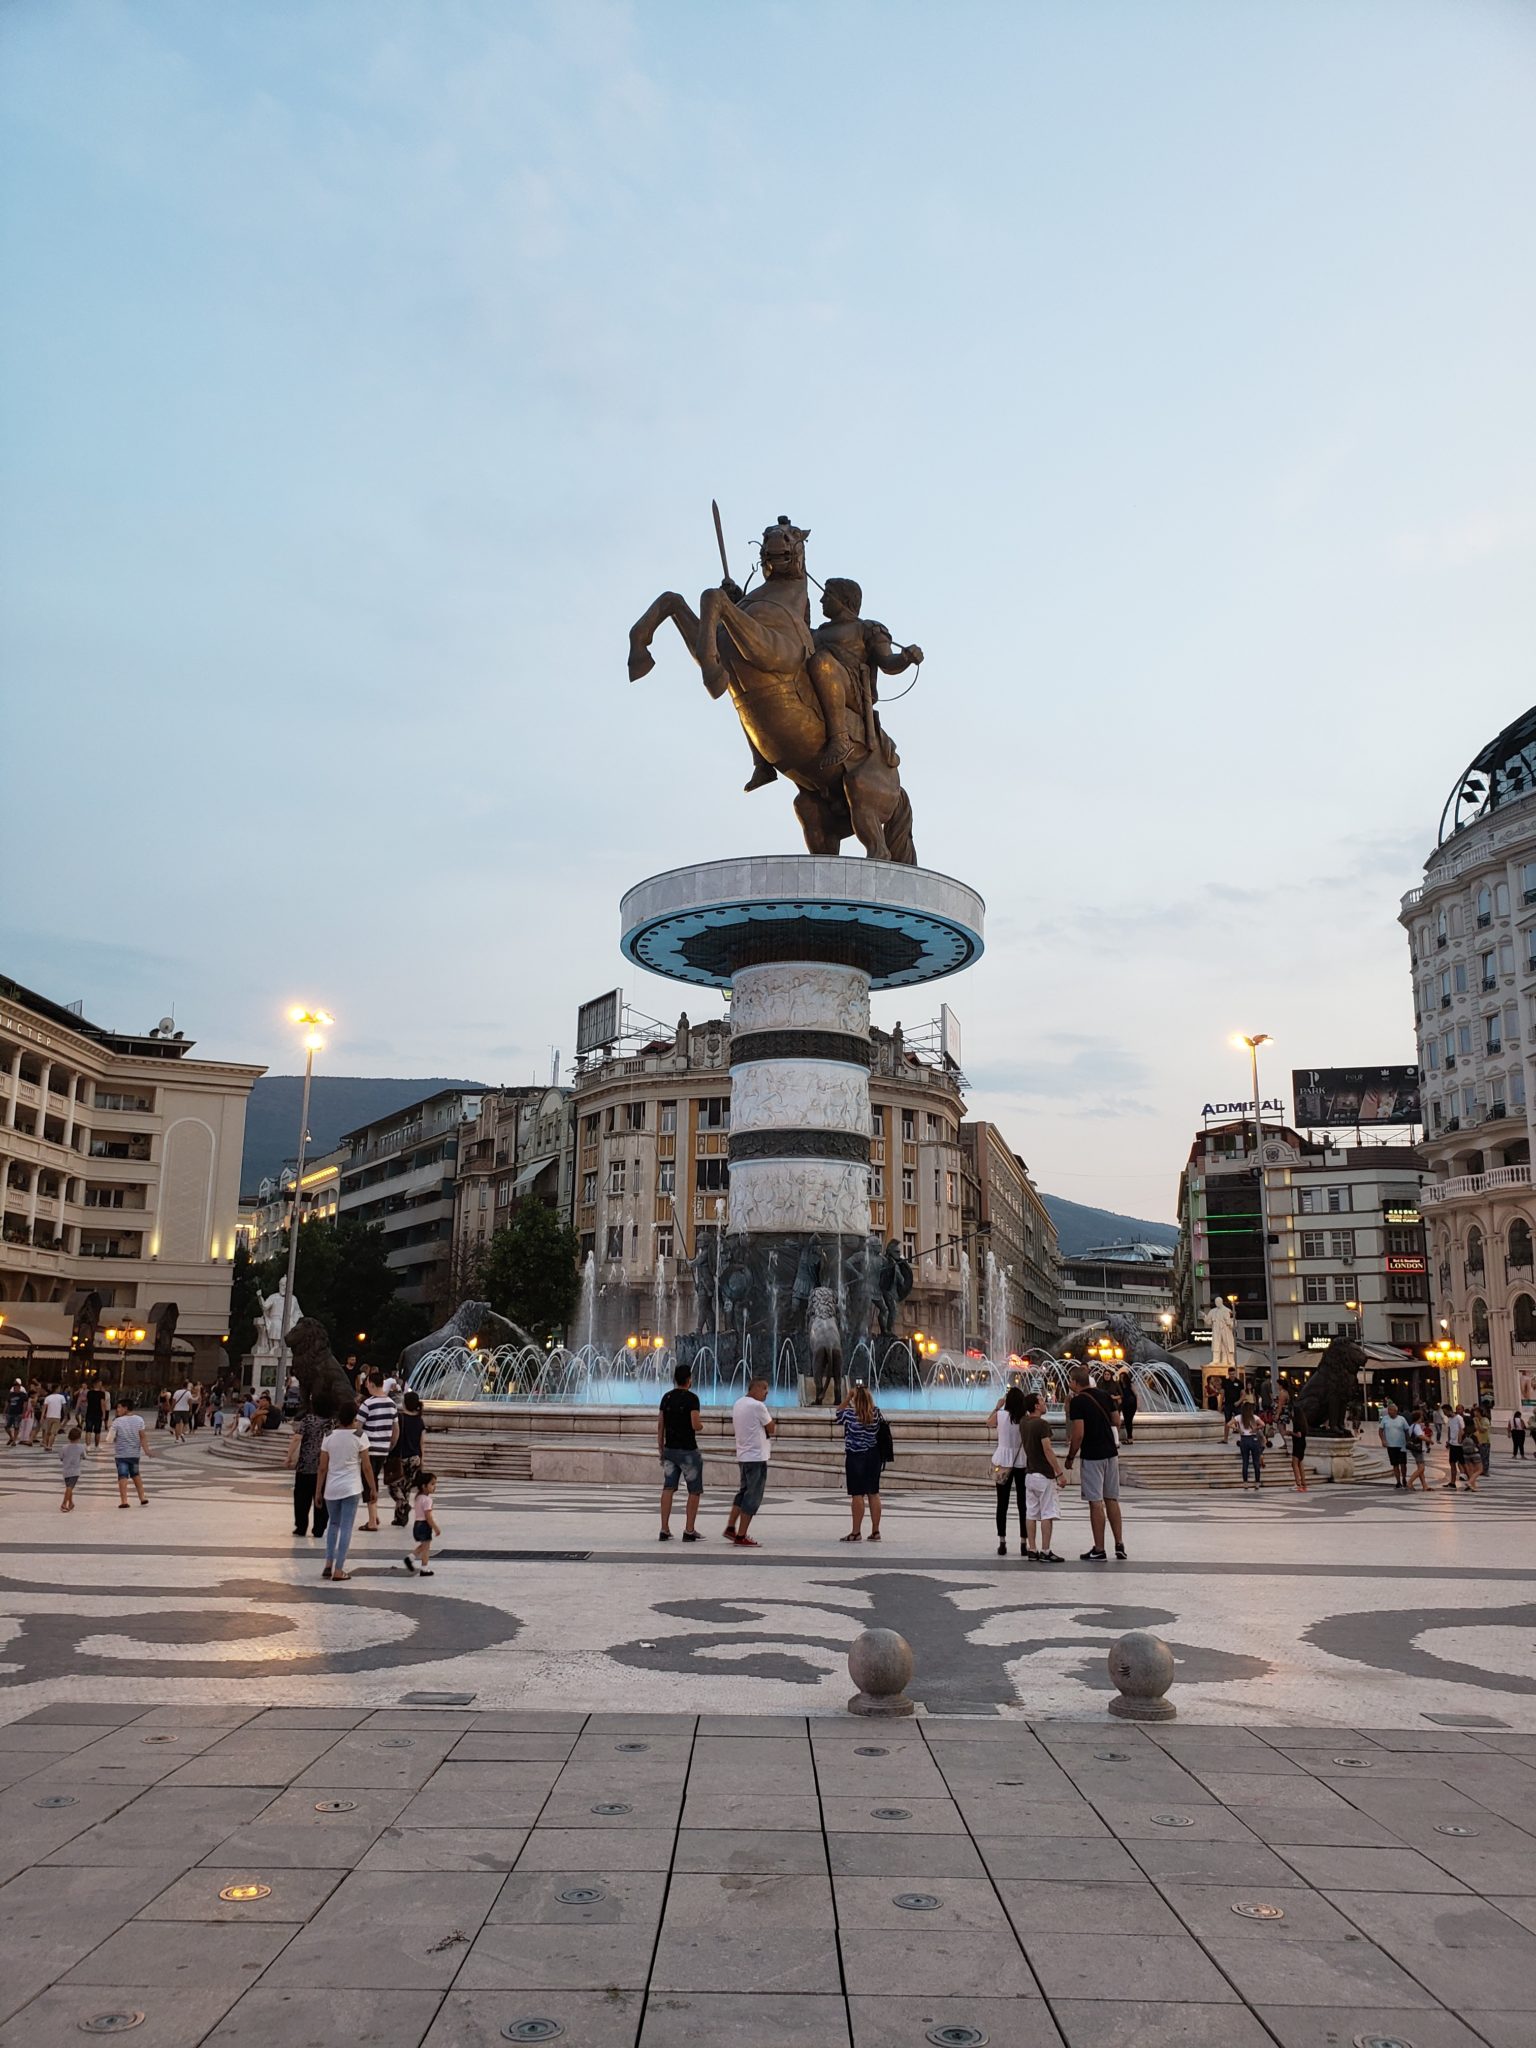 a large statue of a man riding a horse on a pedestal in a city